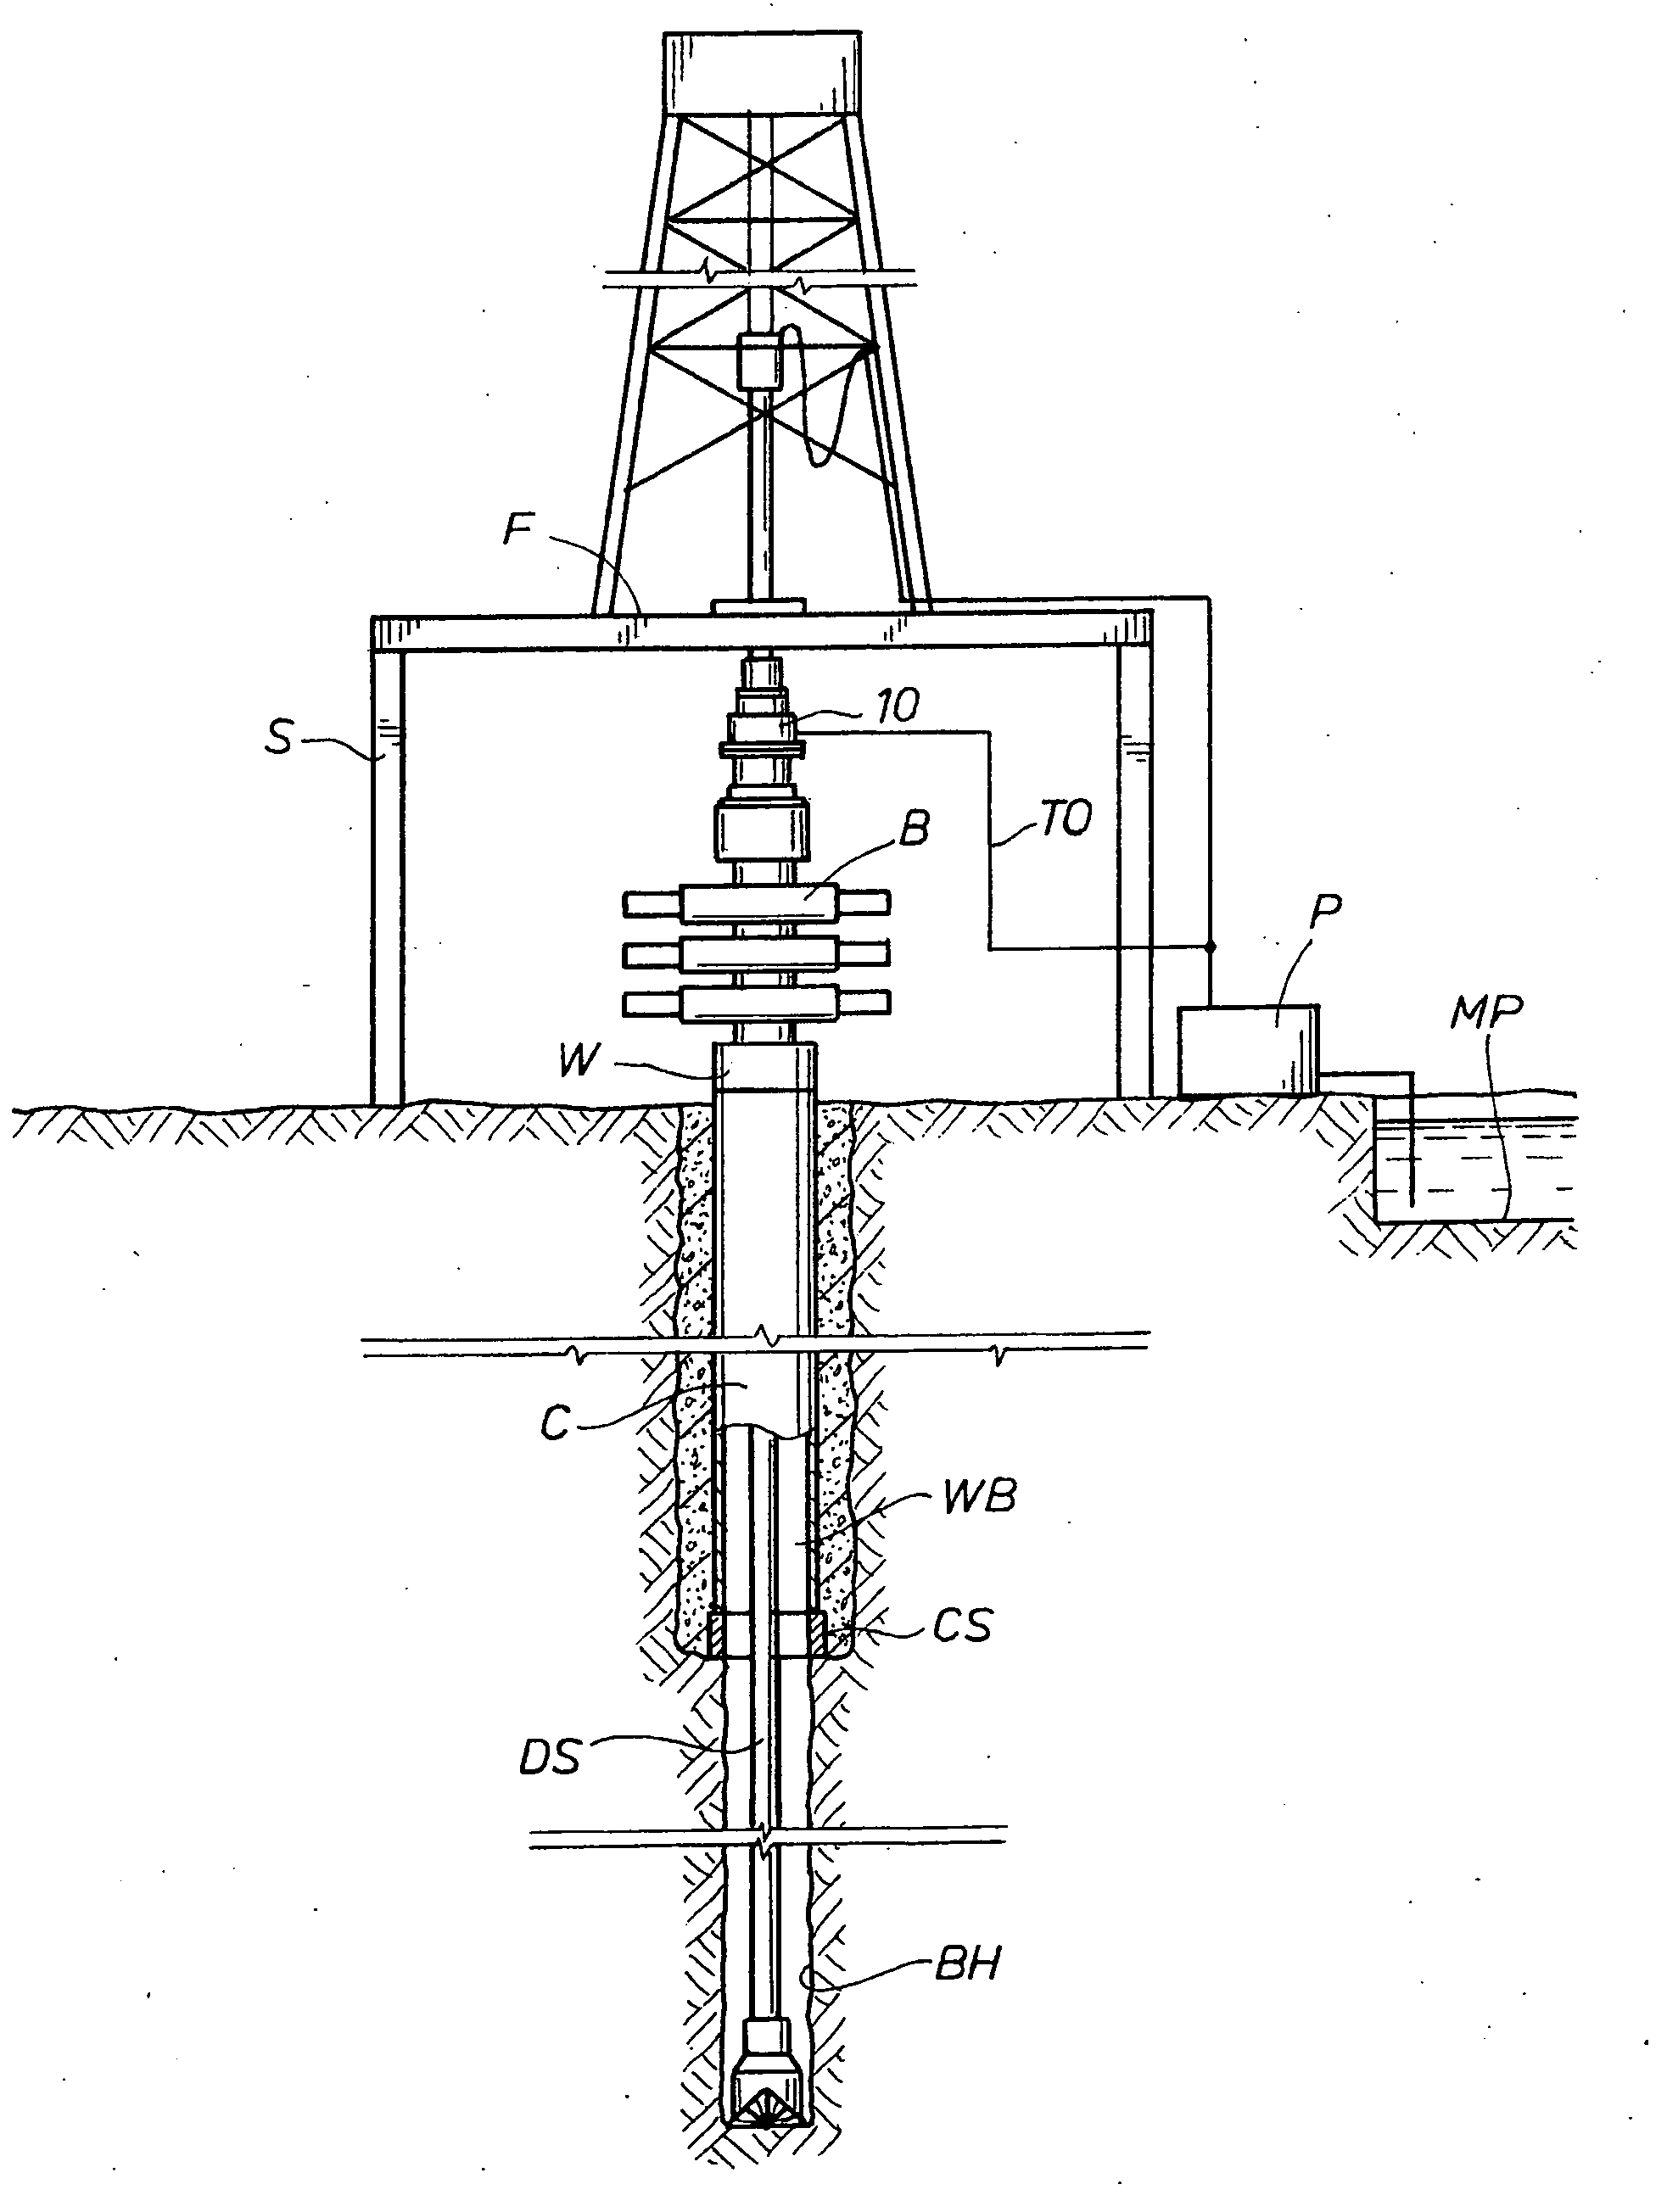 Drilling with a high pressure rotating control device